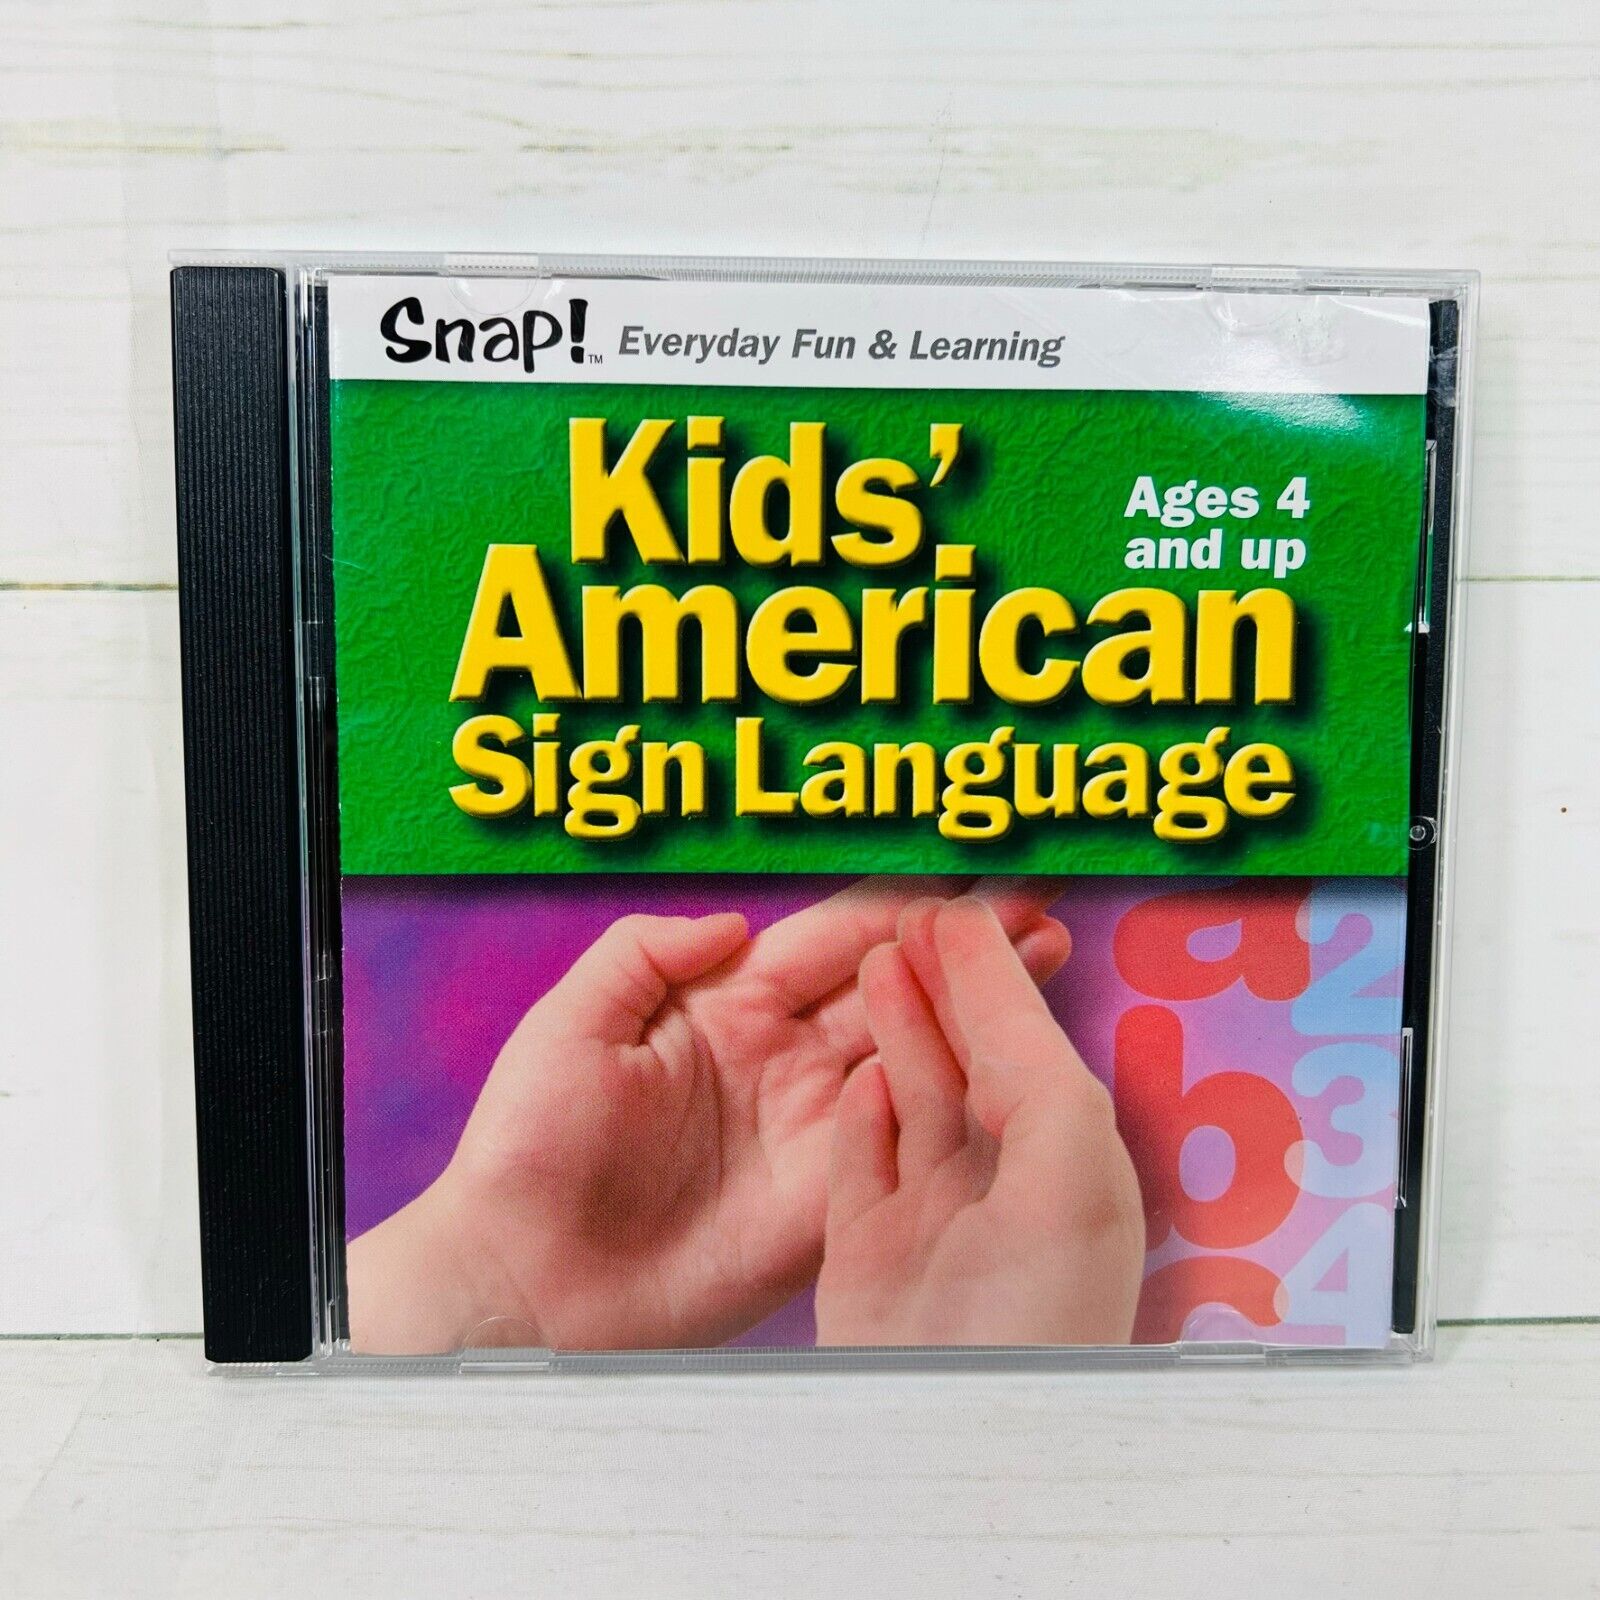 Snap Kids American Sign Language Cd Rom Ages  4 And Up